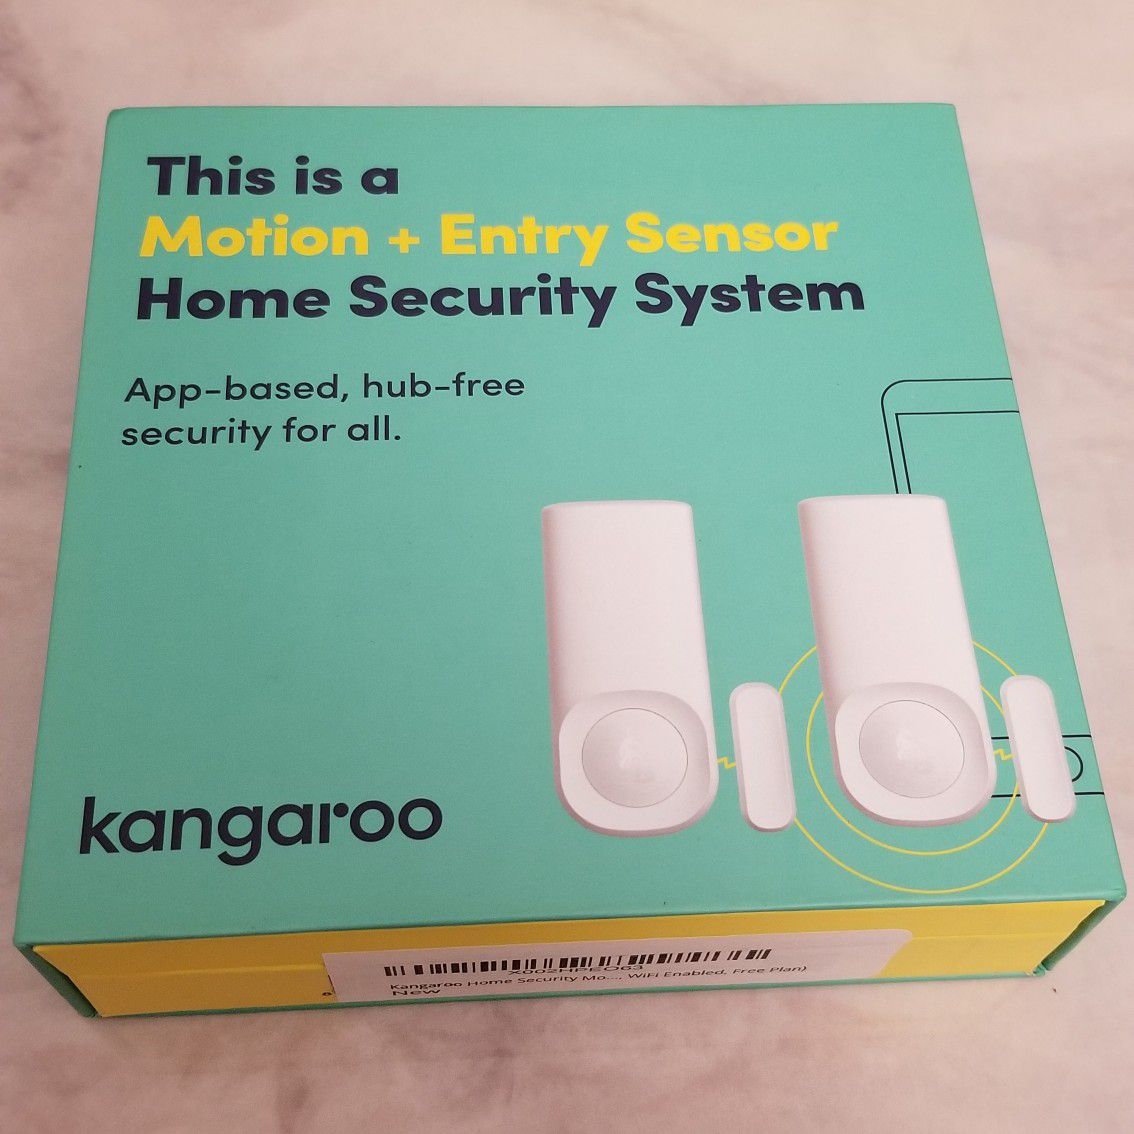 Kangaroo Home Smart WiFi Wireless Security and Surveillance System, Motion + Entry Sensor (2 Pack, App-Based, Wi-fi Enabled)